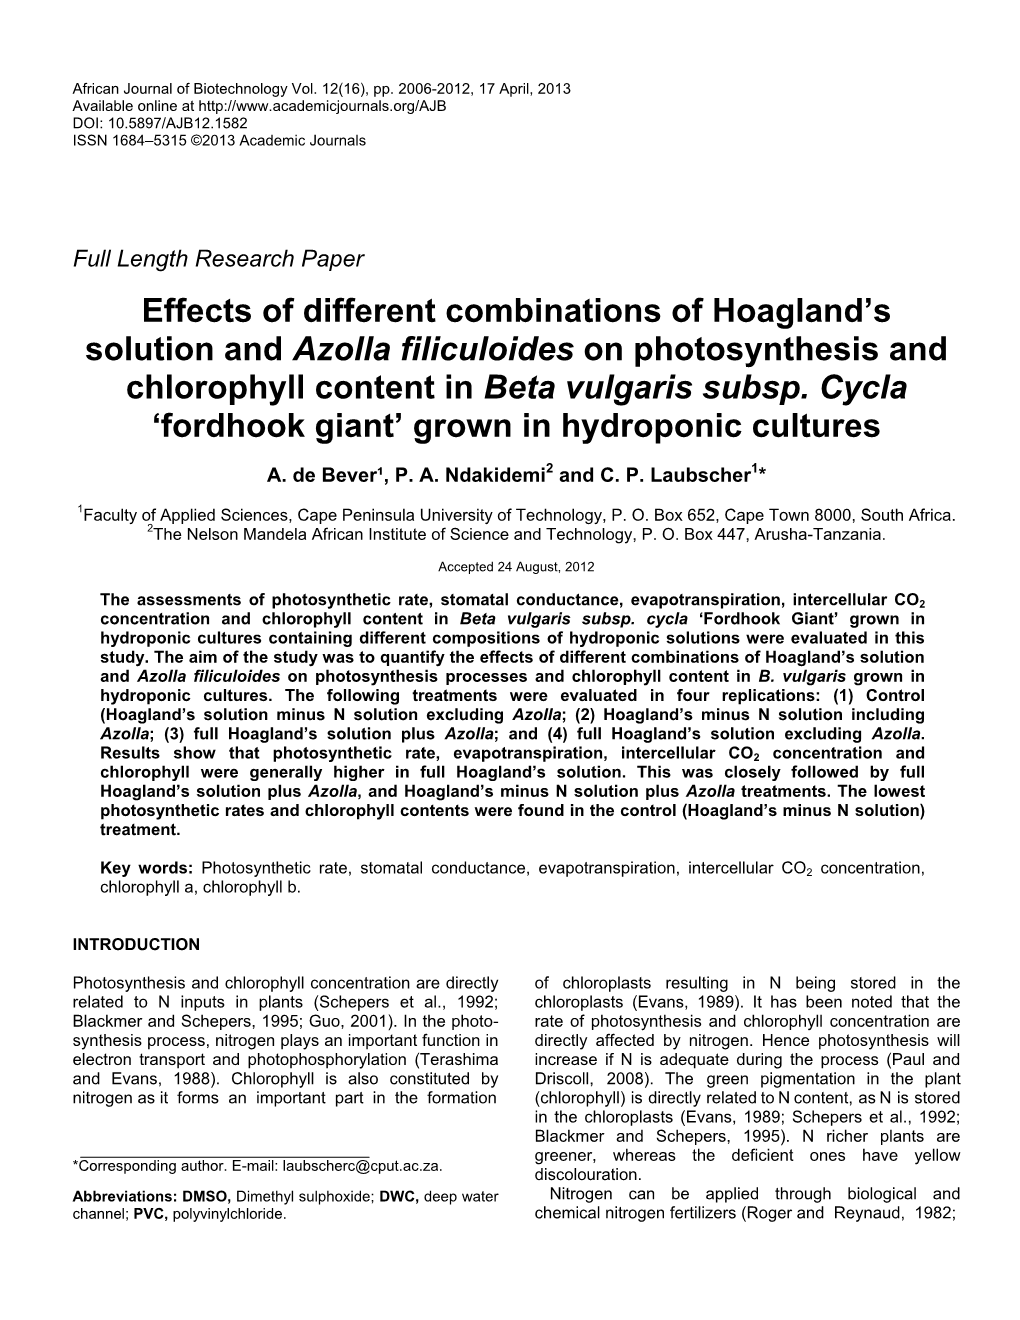 Effects of Different Combinations of Hoagland's Solution and Azolla